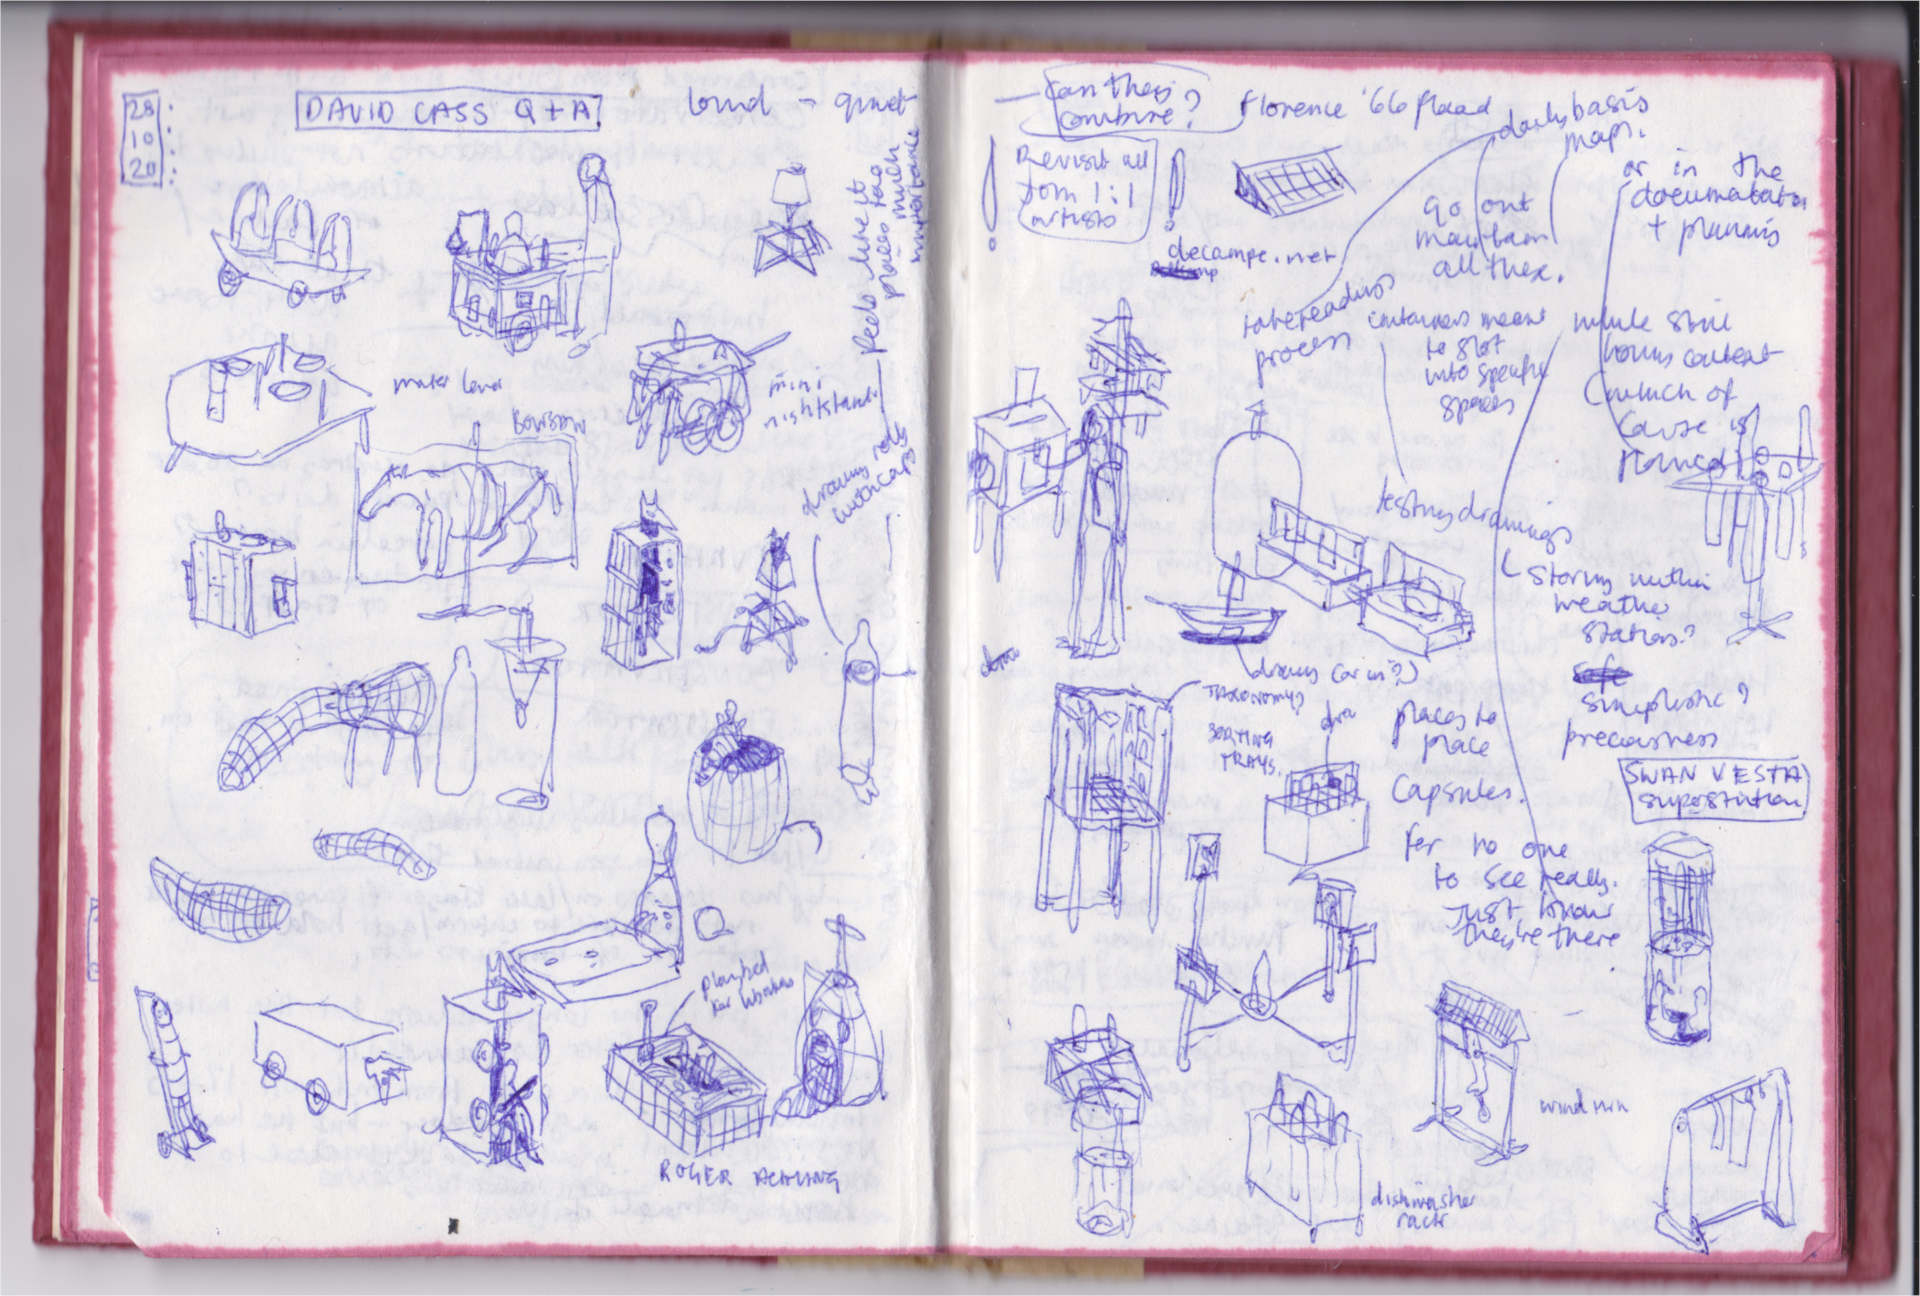 Scan of a notebook page with thumbnail drawings of various contraptions